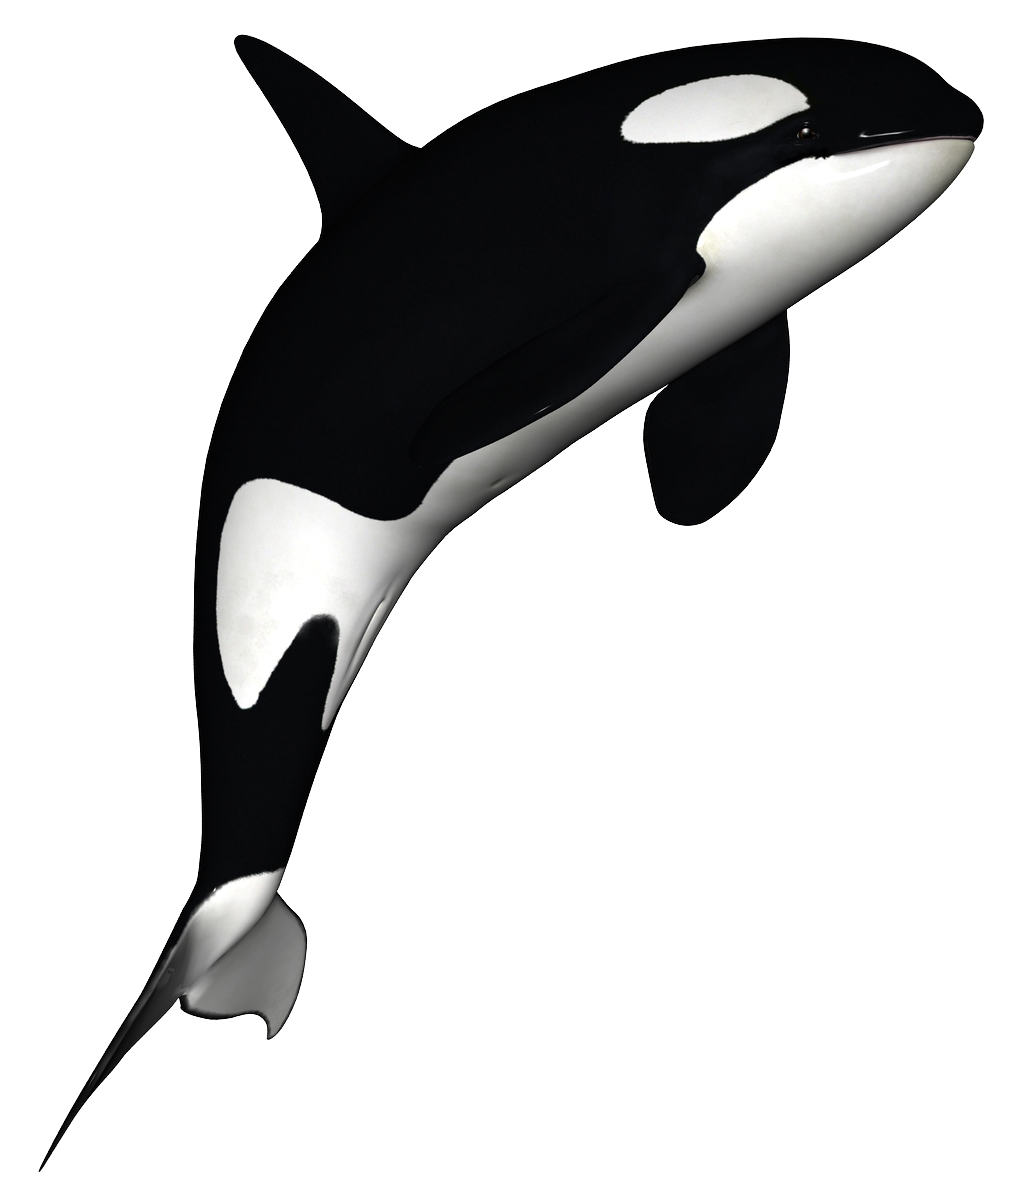 Killer Whale Picture PNG Imag